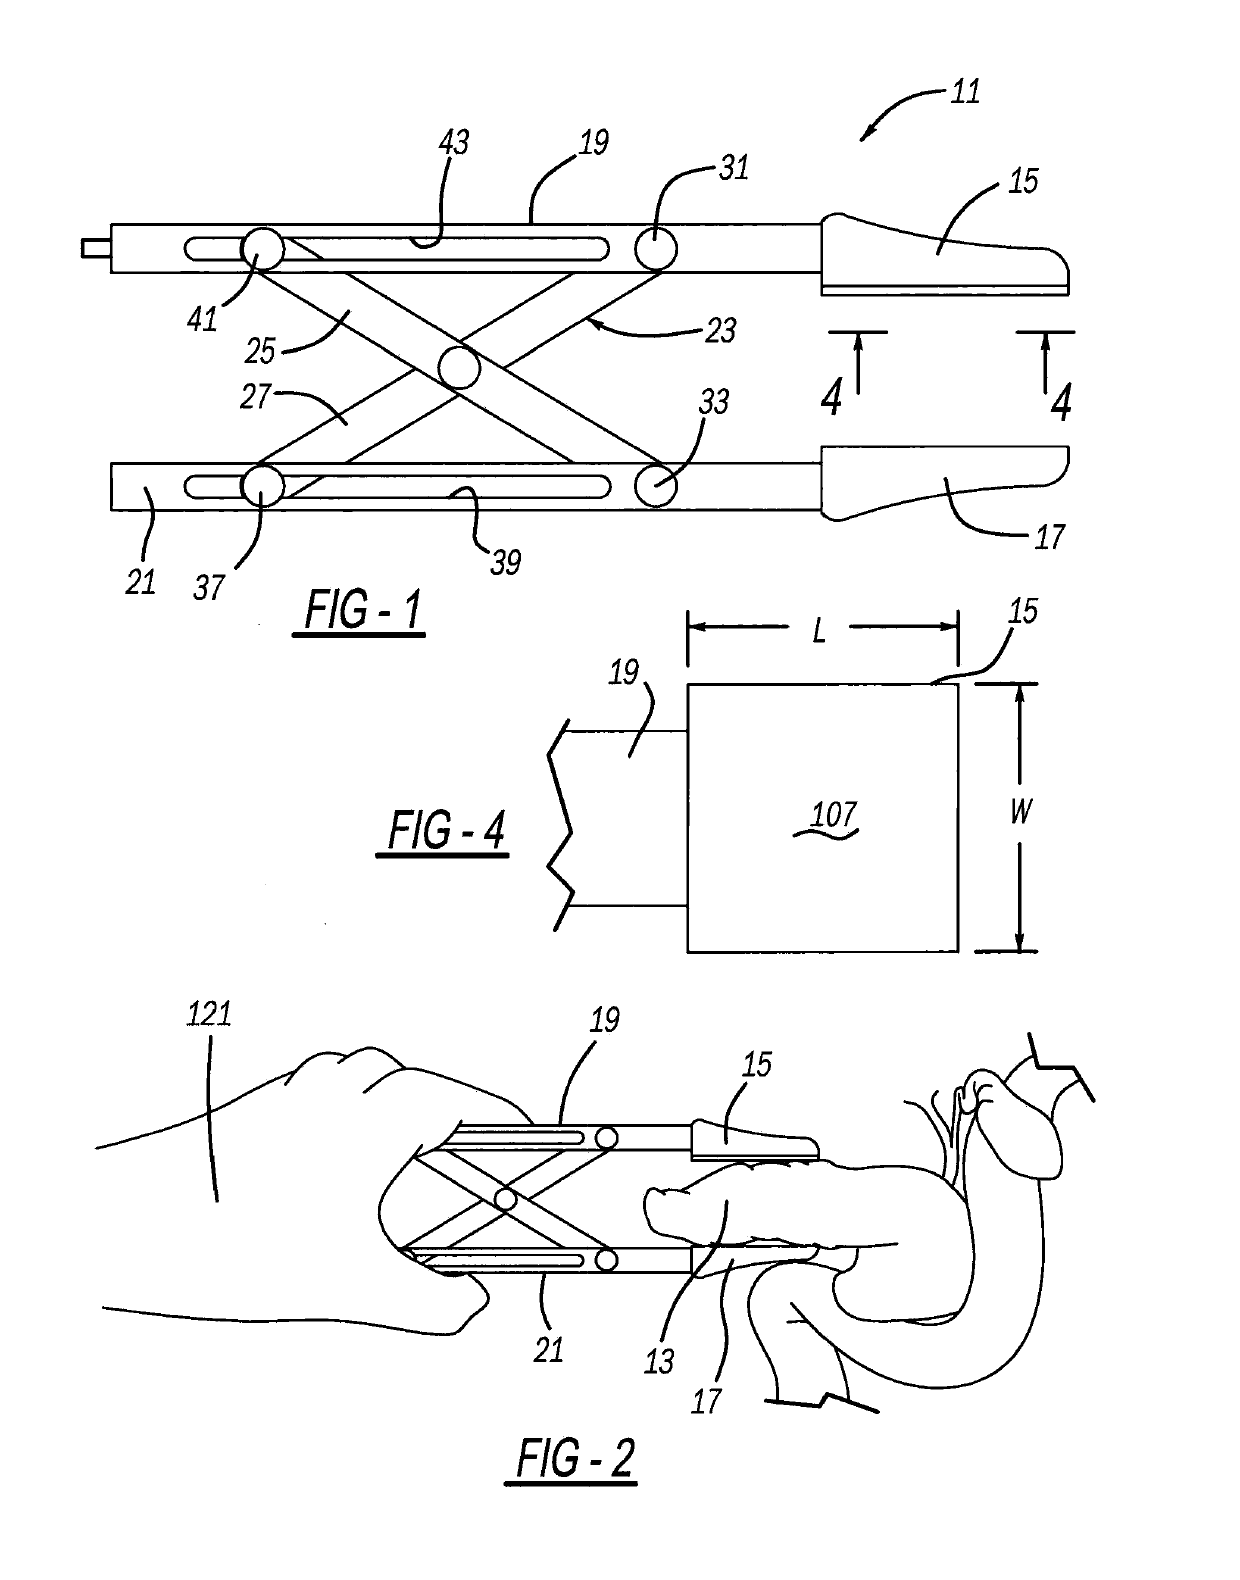 Surgical tool with pressure sensor